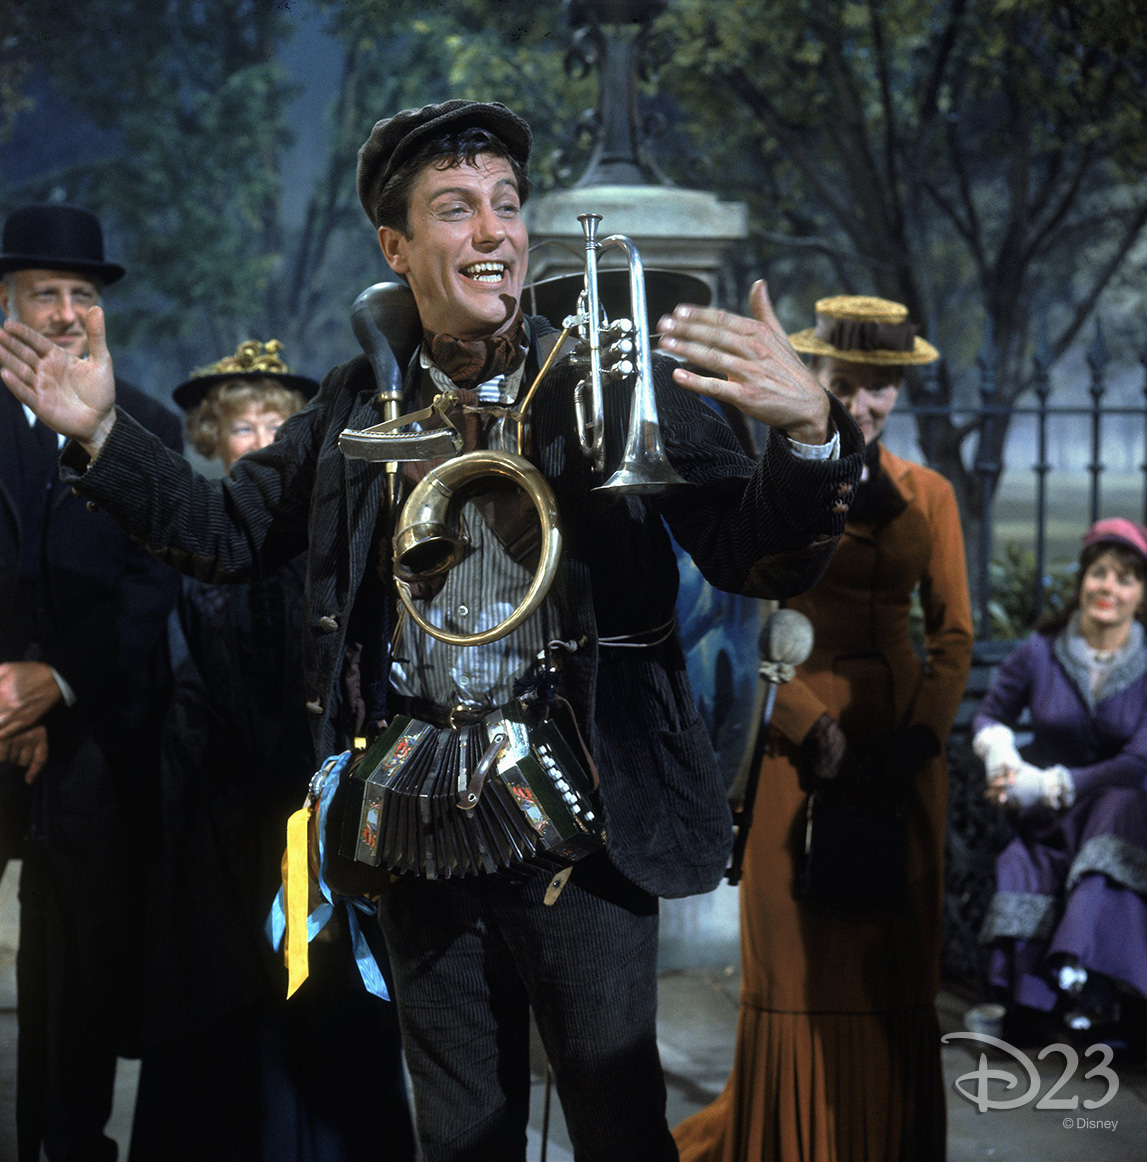 Dick van dyke song rapping mary poppins